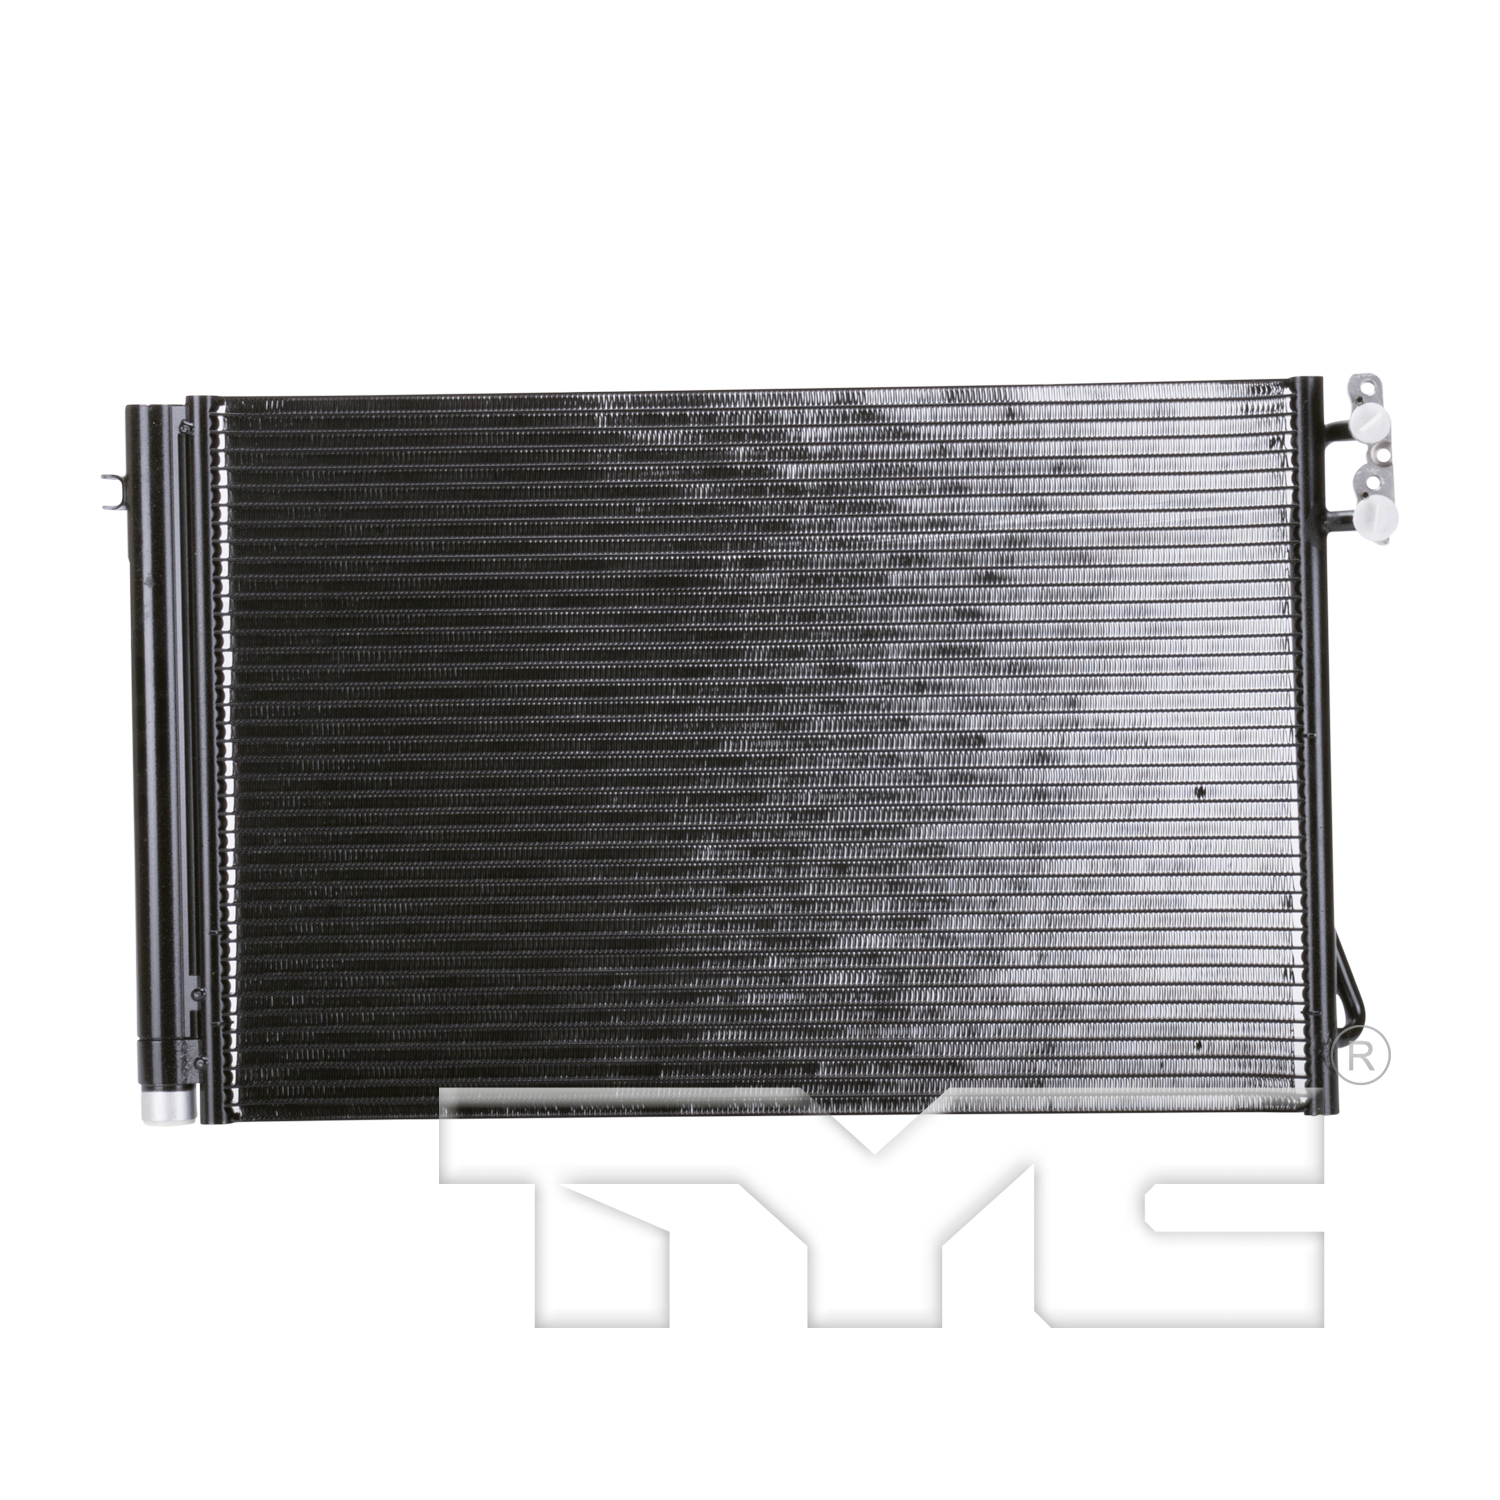 Aftermarket AC CONDENSERS for BMW - 325I, 325i,06-06,Air conditioning condenser